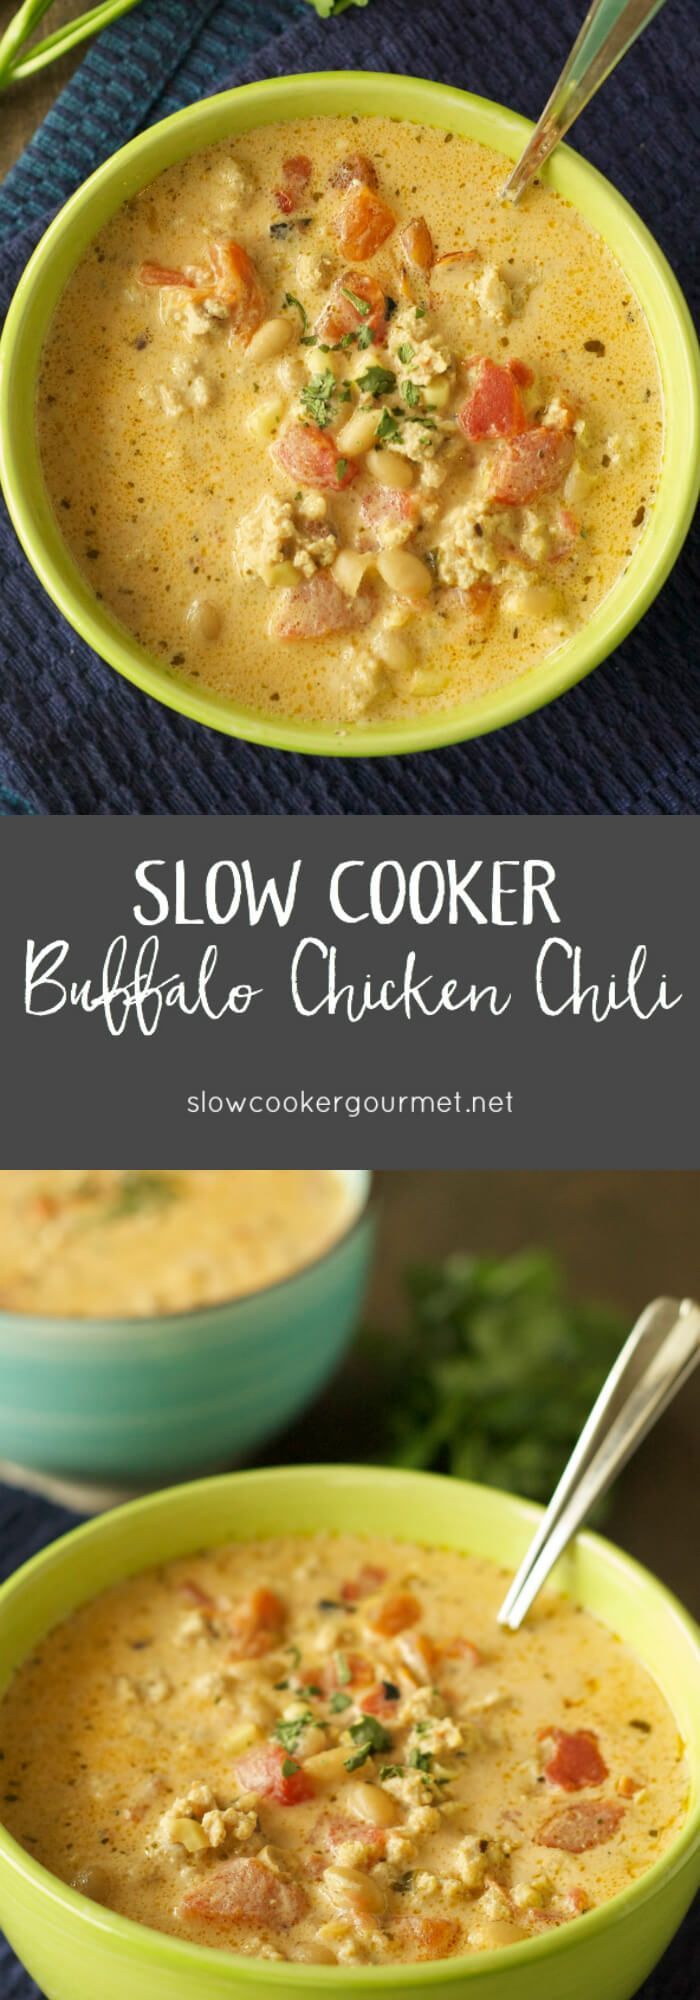 Slow Cooker Buffalo Chicken Chili | Posted By: DebbieNet.com |